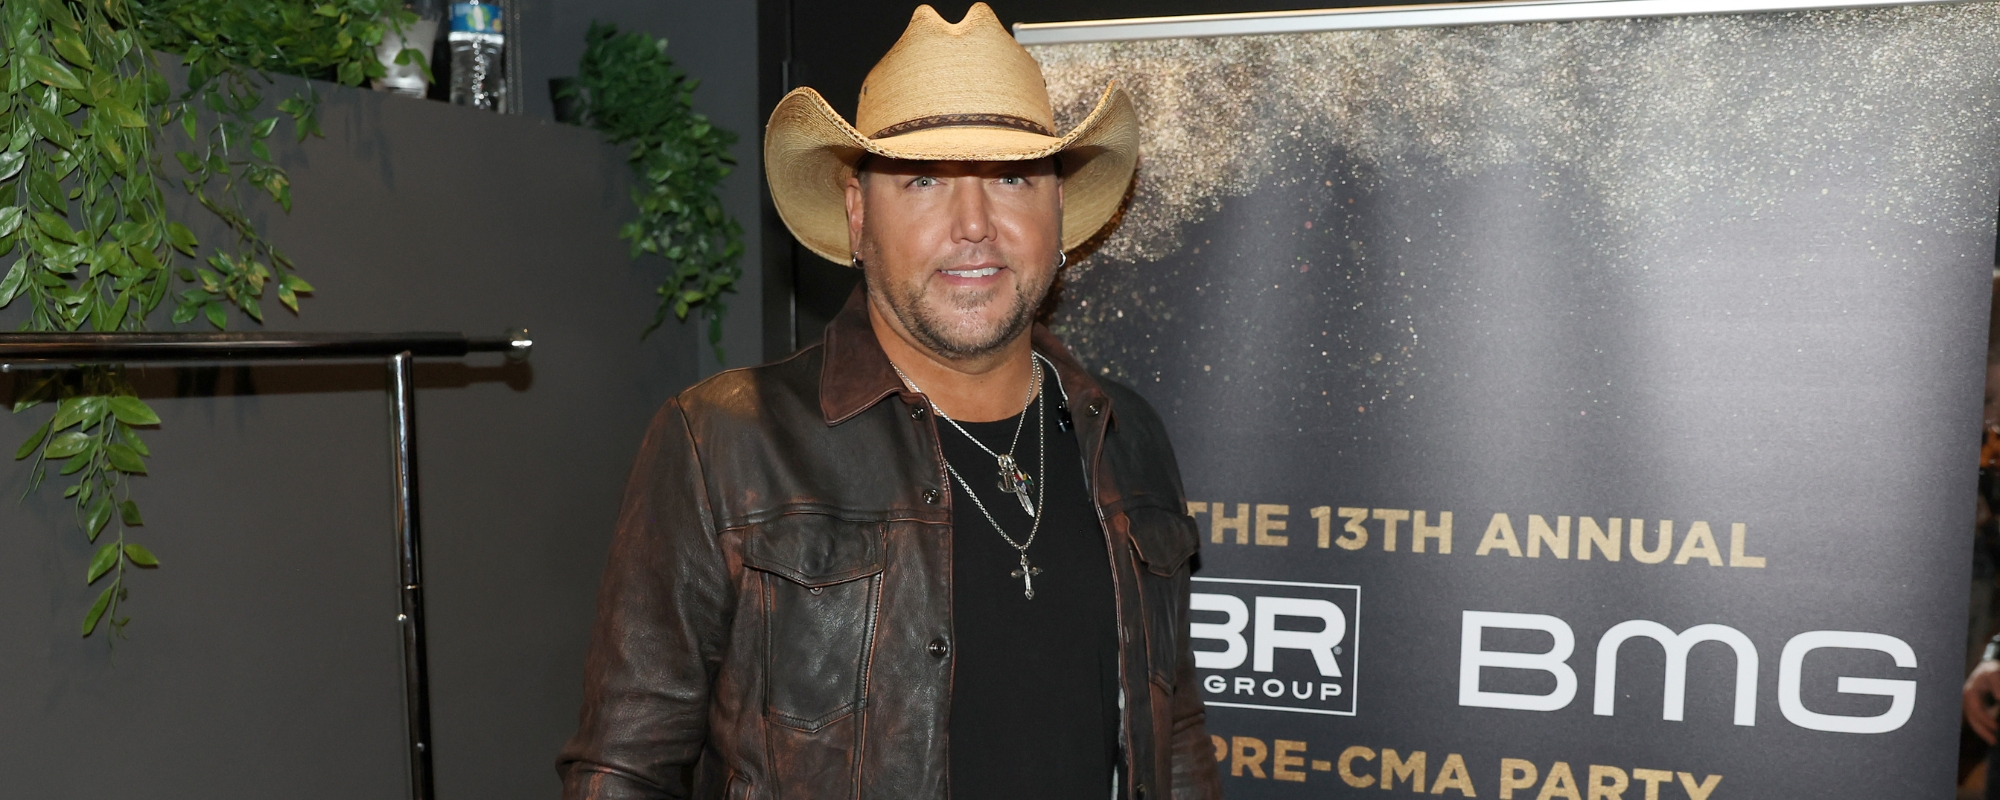 Jason Aldean Talks Why Song “Let Your Boys Be Country” is So Necessary in Today’s World